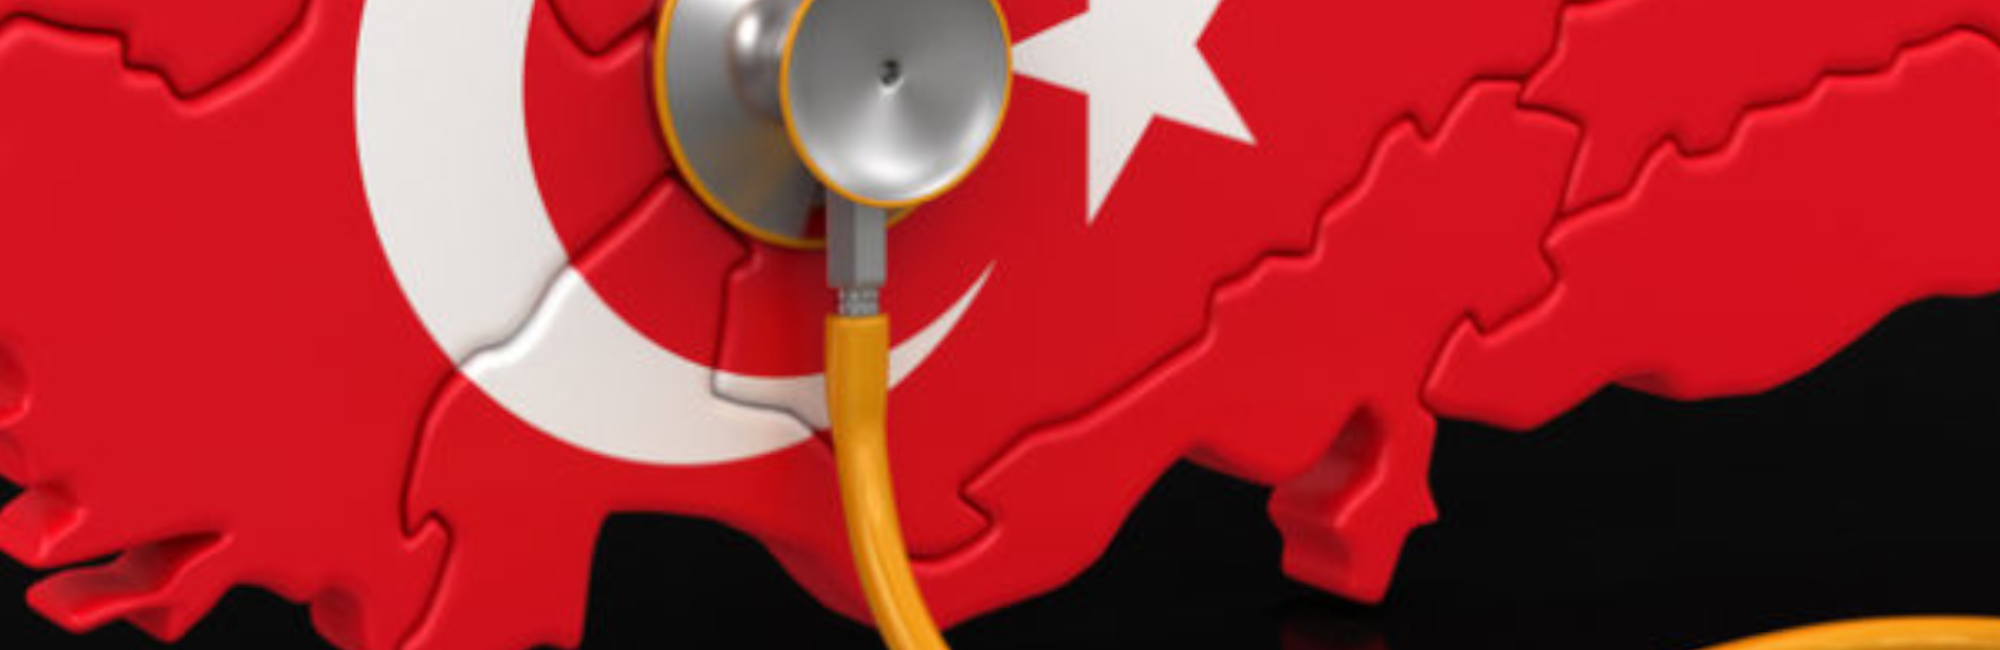 Turkey is a Model Country in Health System